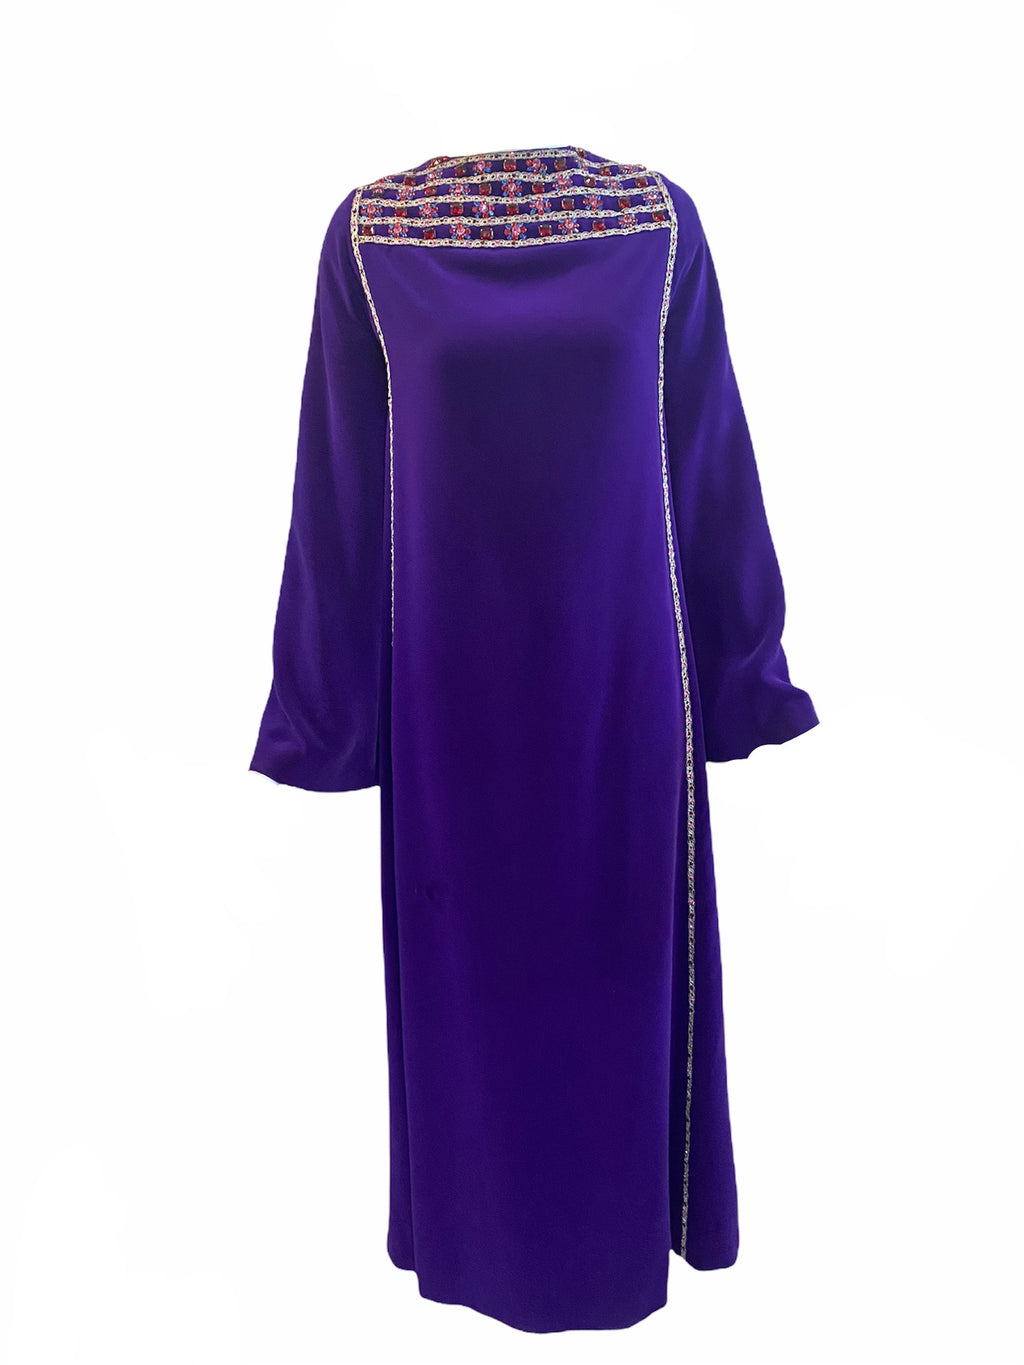 Malcolm Starr 60s Purple Velvet Jeweled Gown FRONT 1 of 5